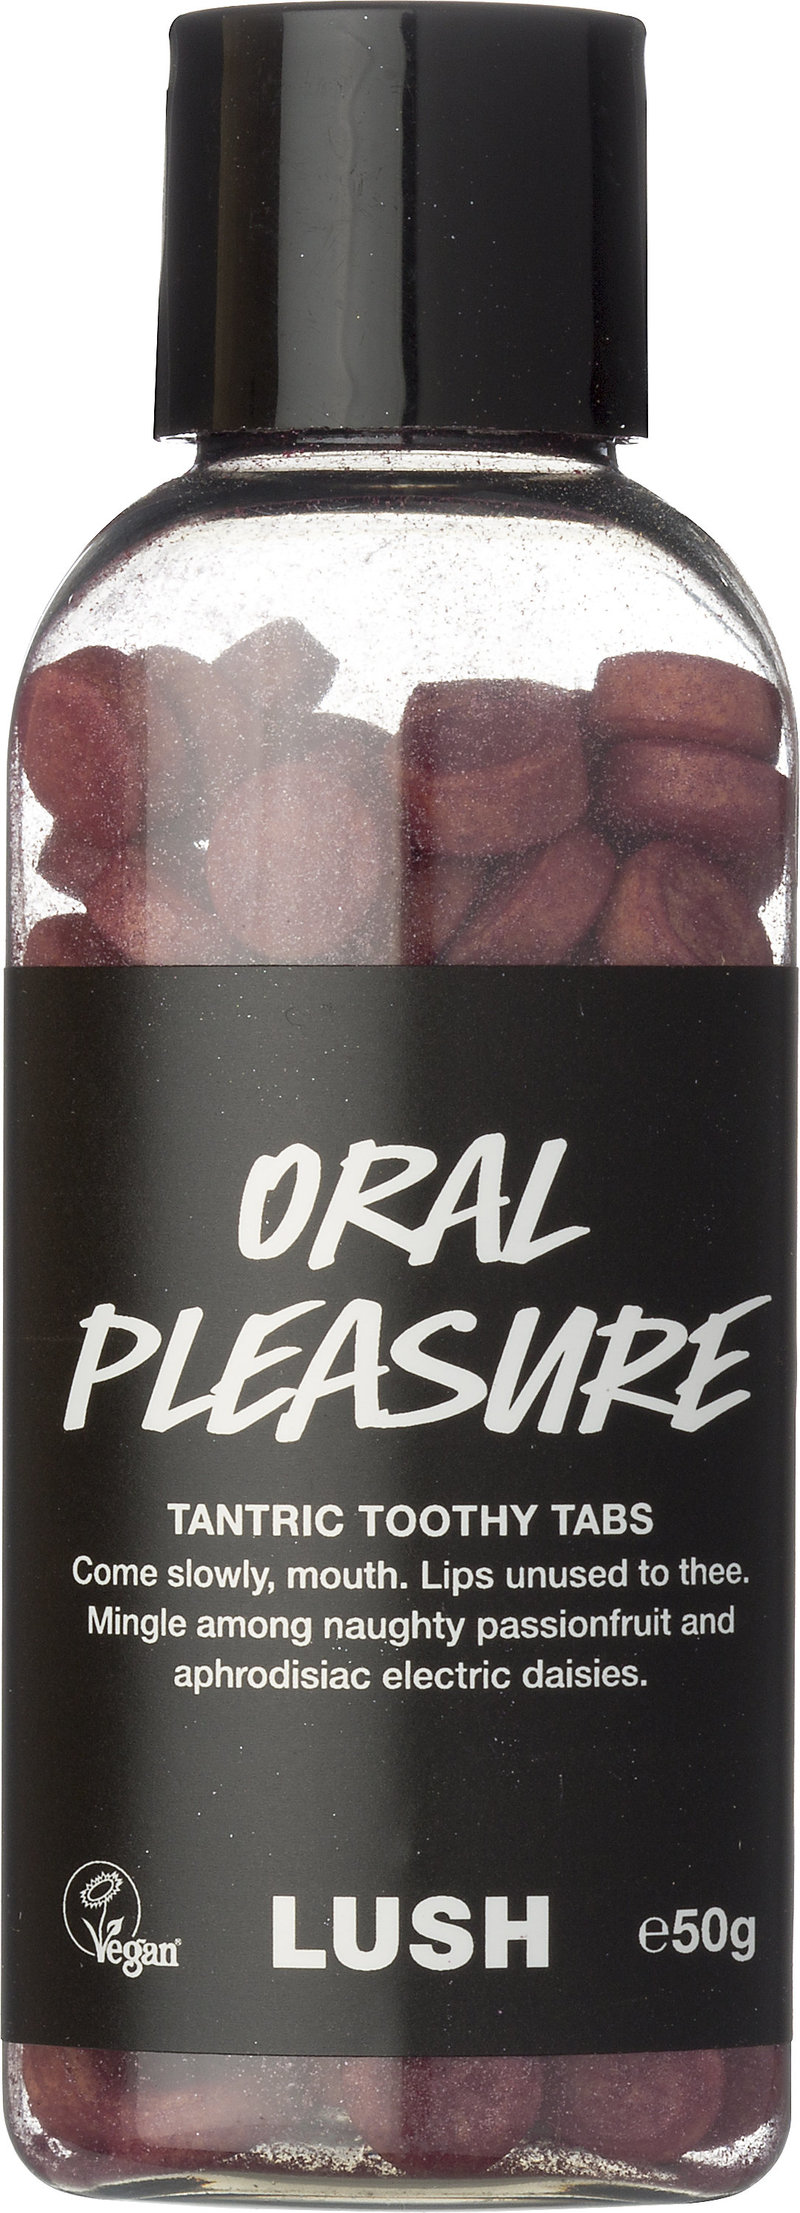 product_mouth_oral_pleasure.jpg